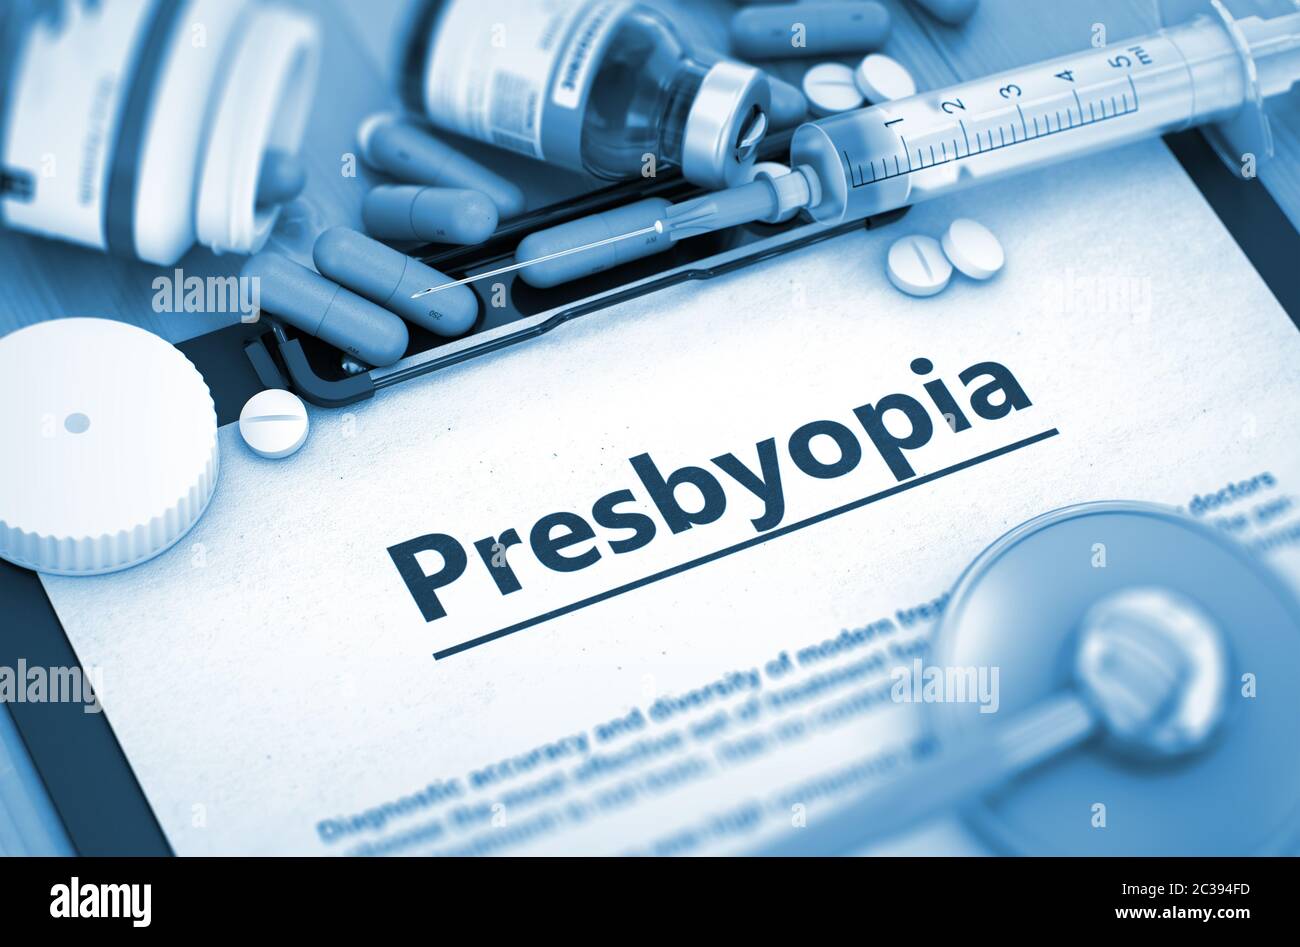 Presbyopia, Medical Concept with Selective Focus. Diagnosis - Presbyopia On Background of Medicaments Composition - Pills, Injections and Syringe. 3D Stock Photo